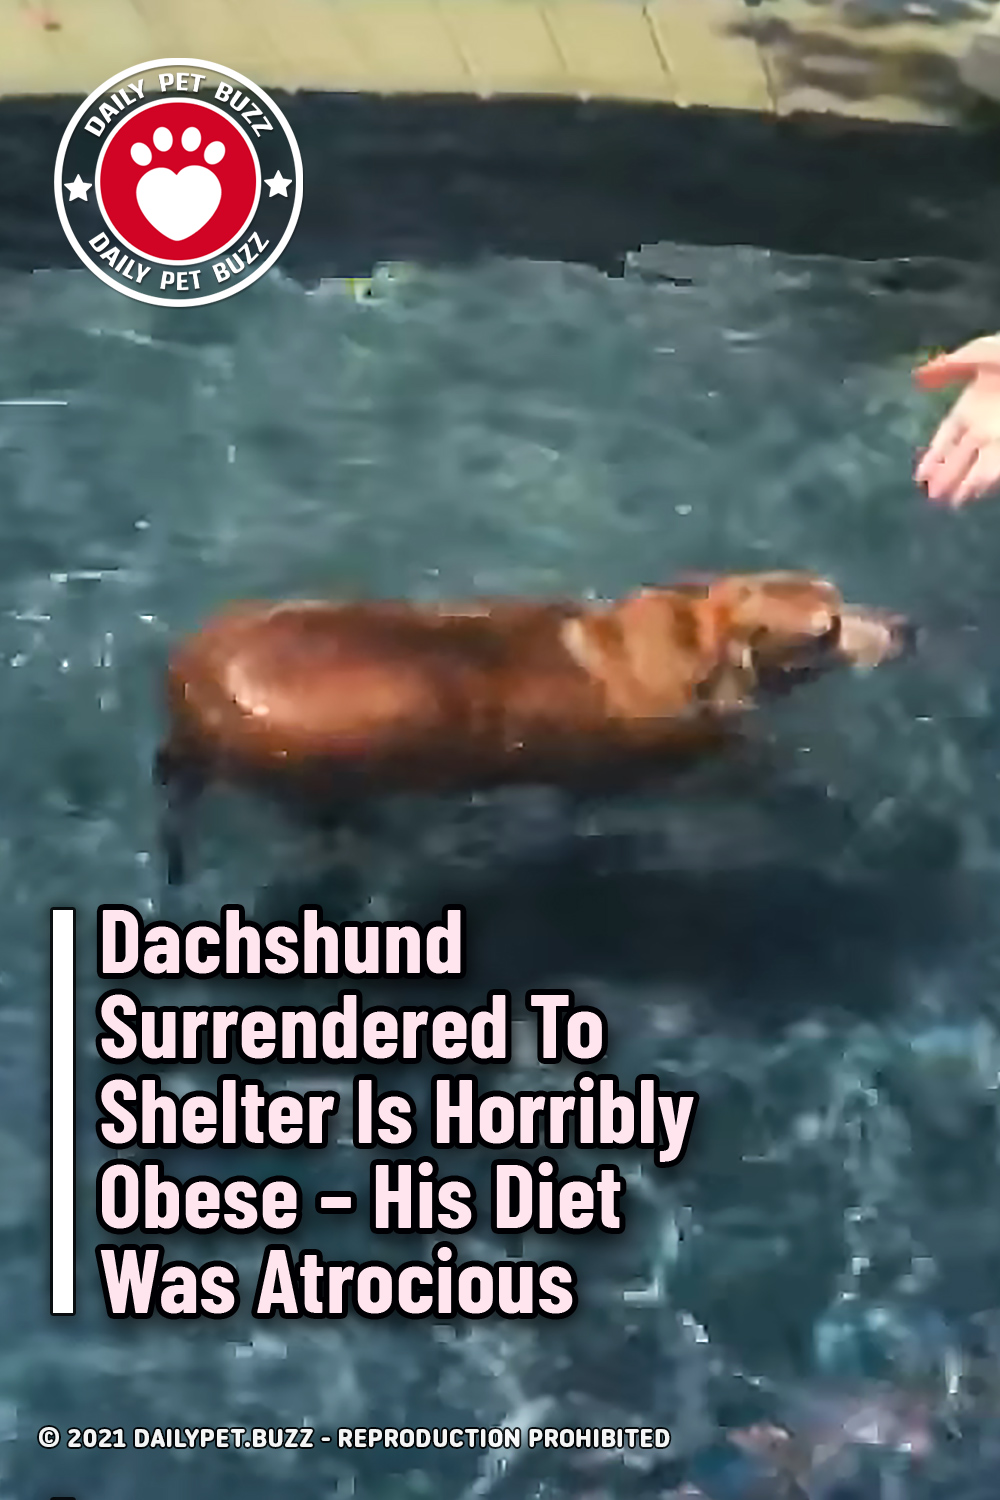 Dachshund Surrendered To Shelter Is Horribly Obese – His Diet Was Atrocious